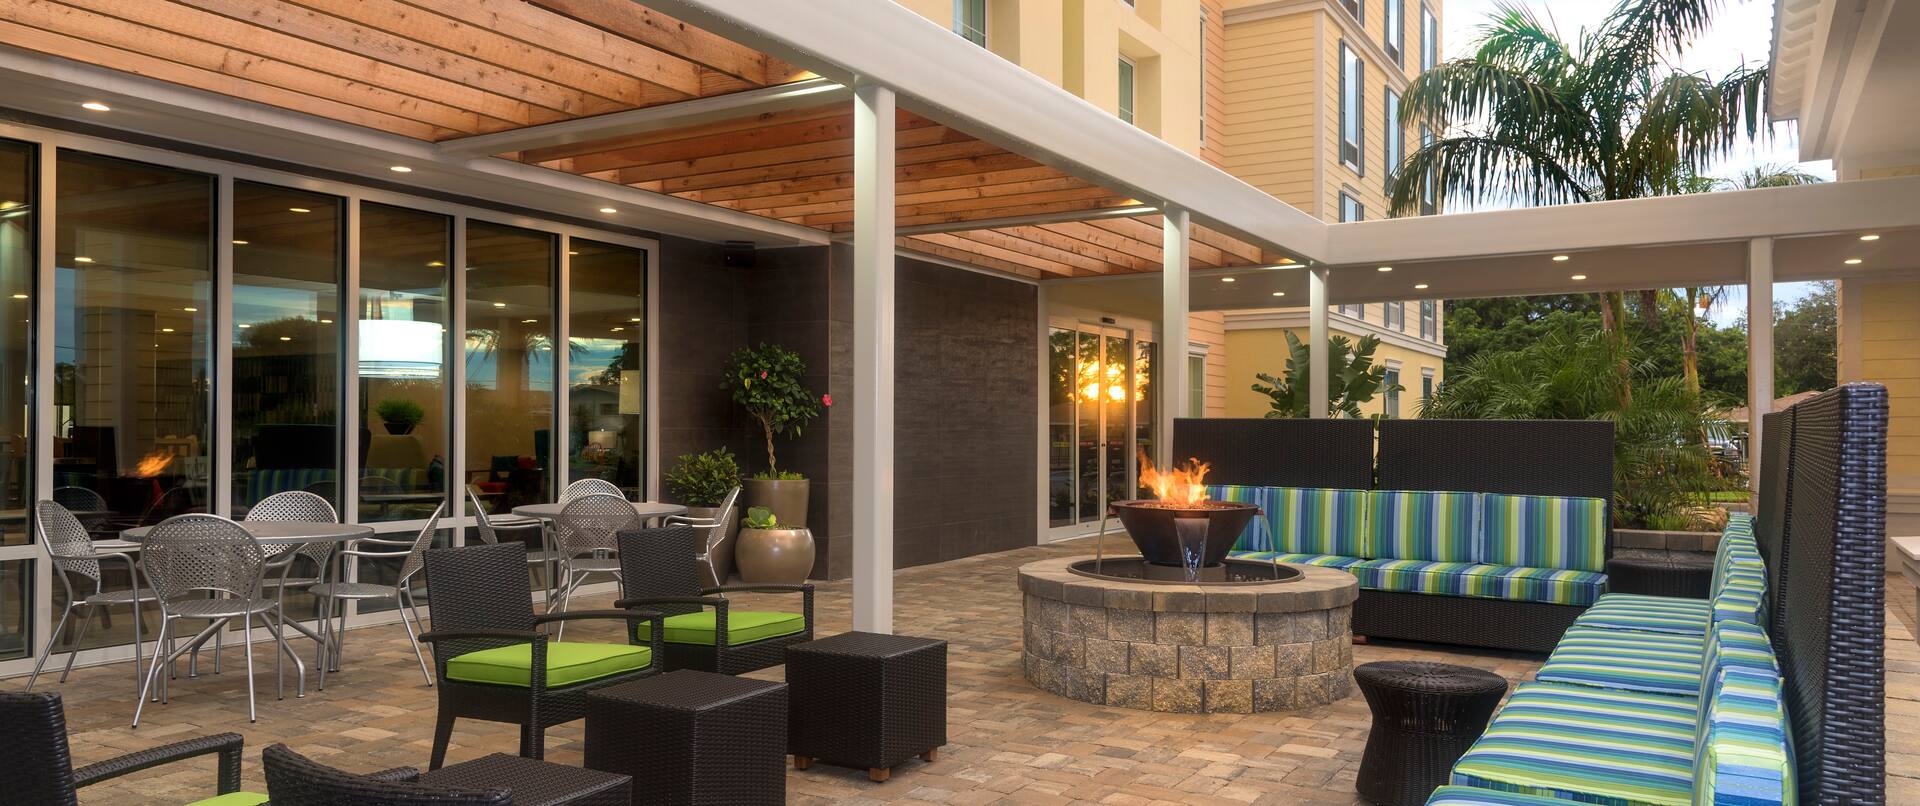 Outdoor Firepit and Lounge Seating